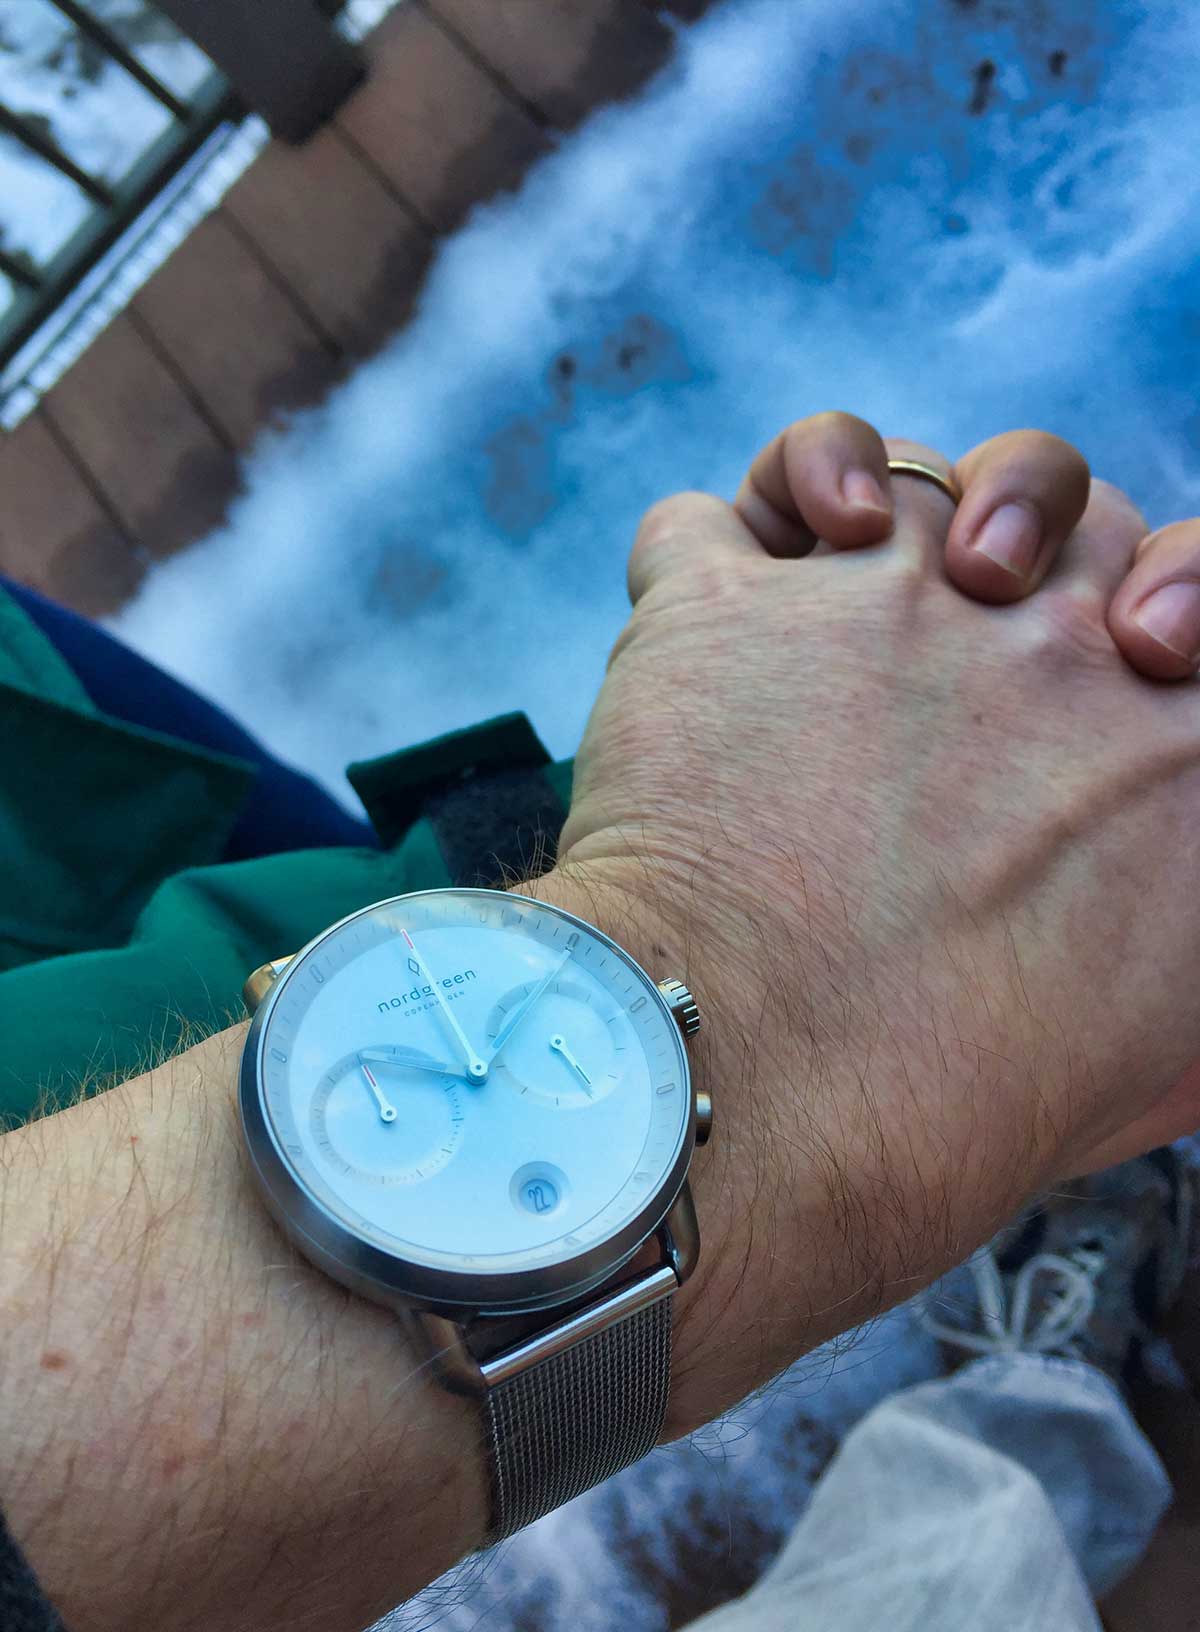 Holding hands of a man an woman with a Nordgreen Pioneer chronograph on the man's wrist